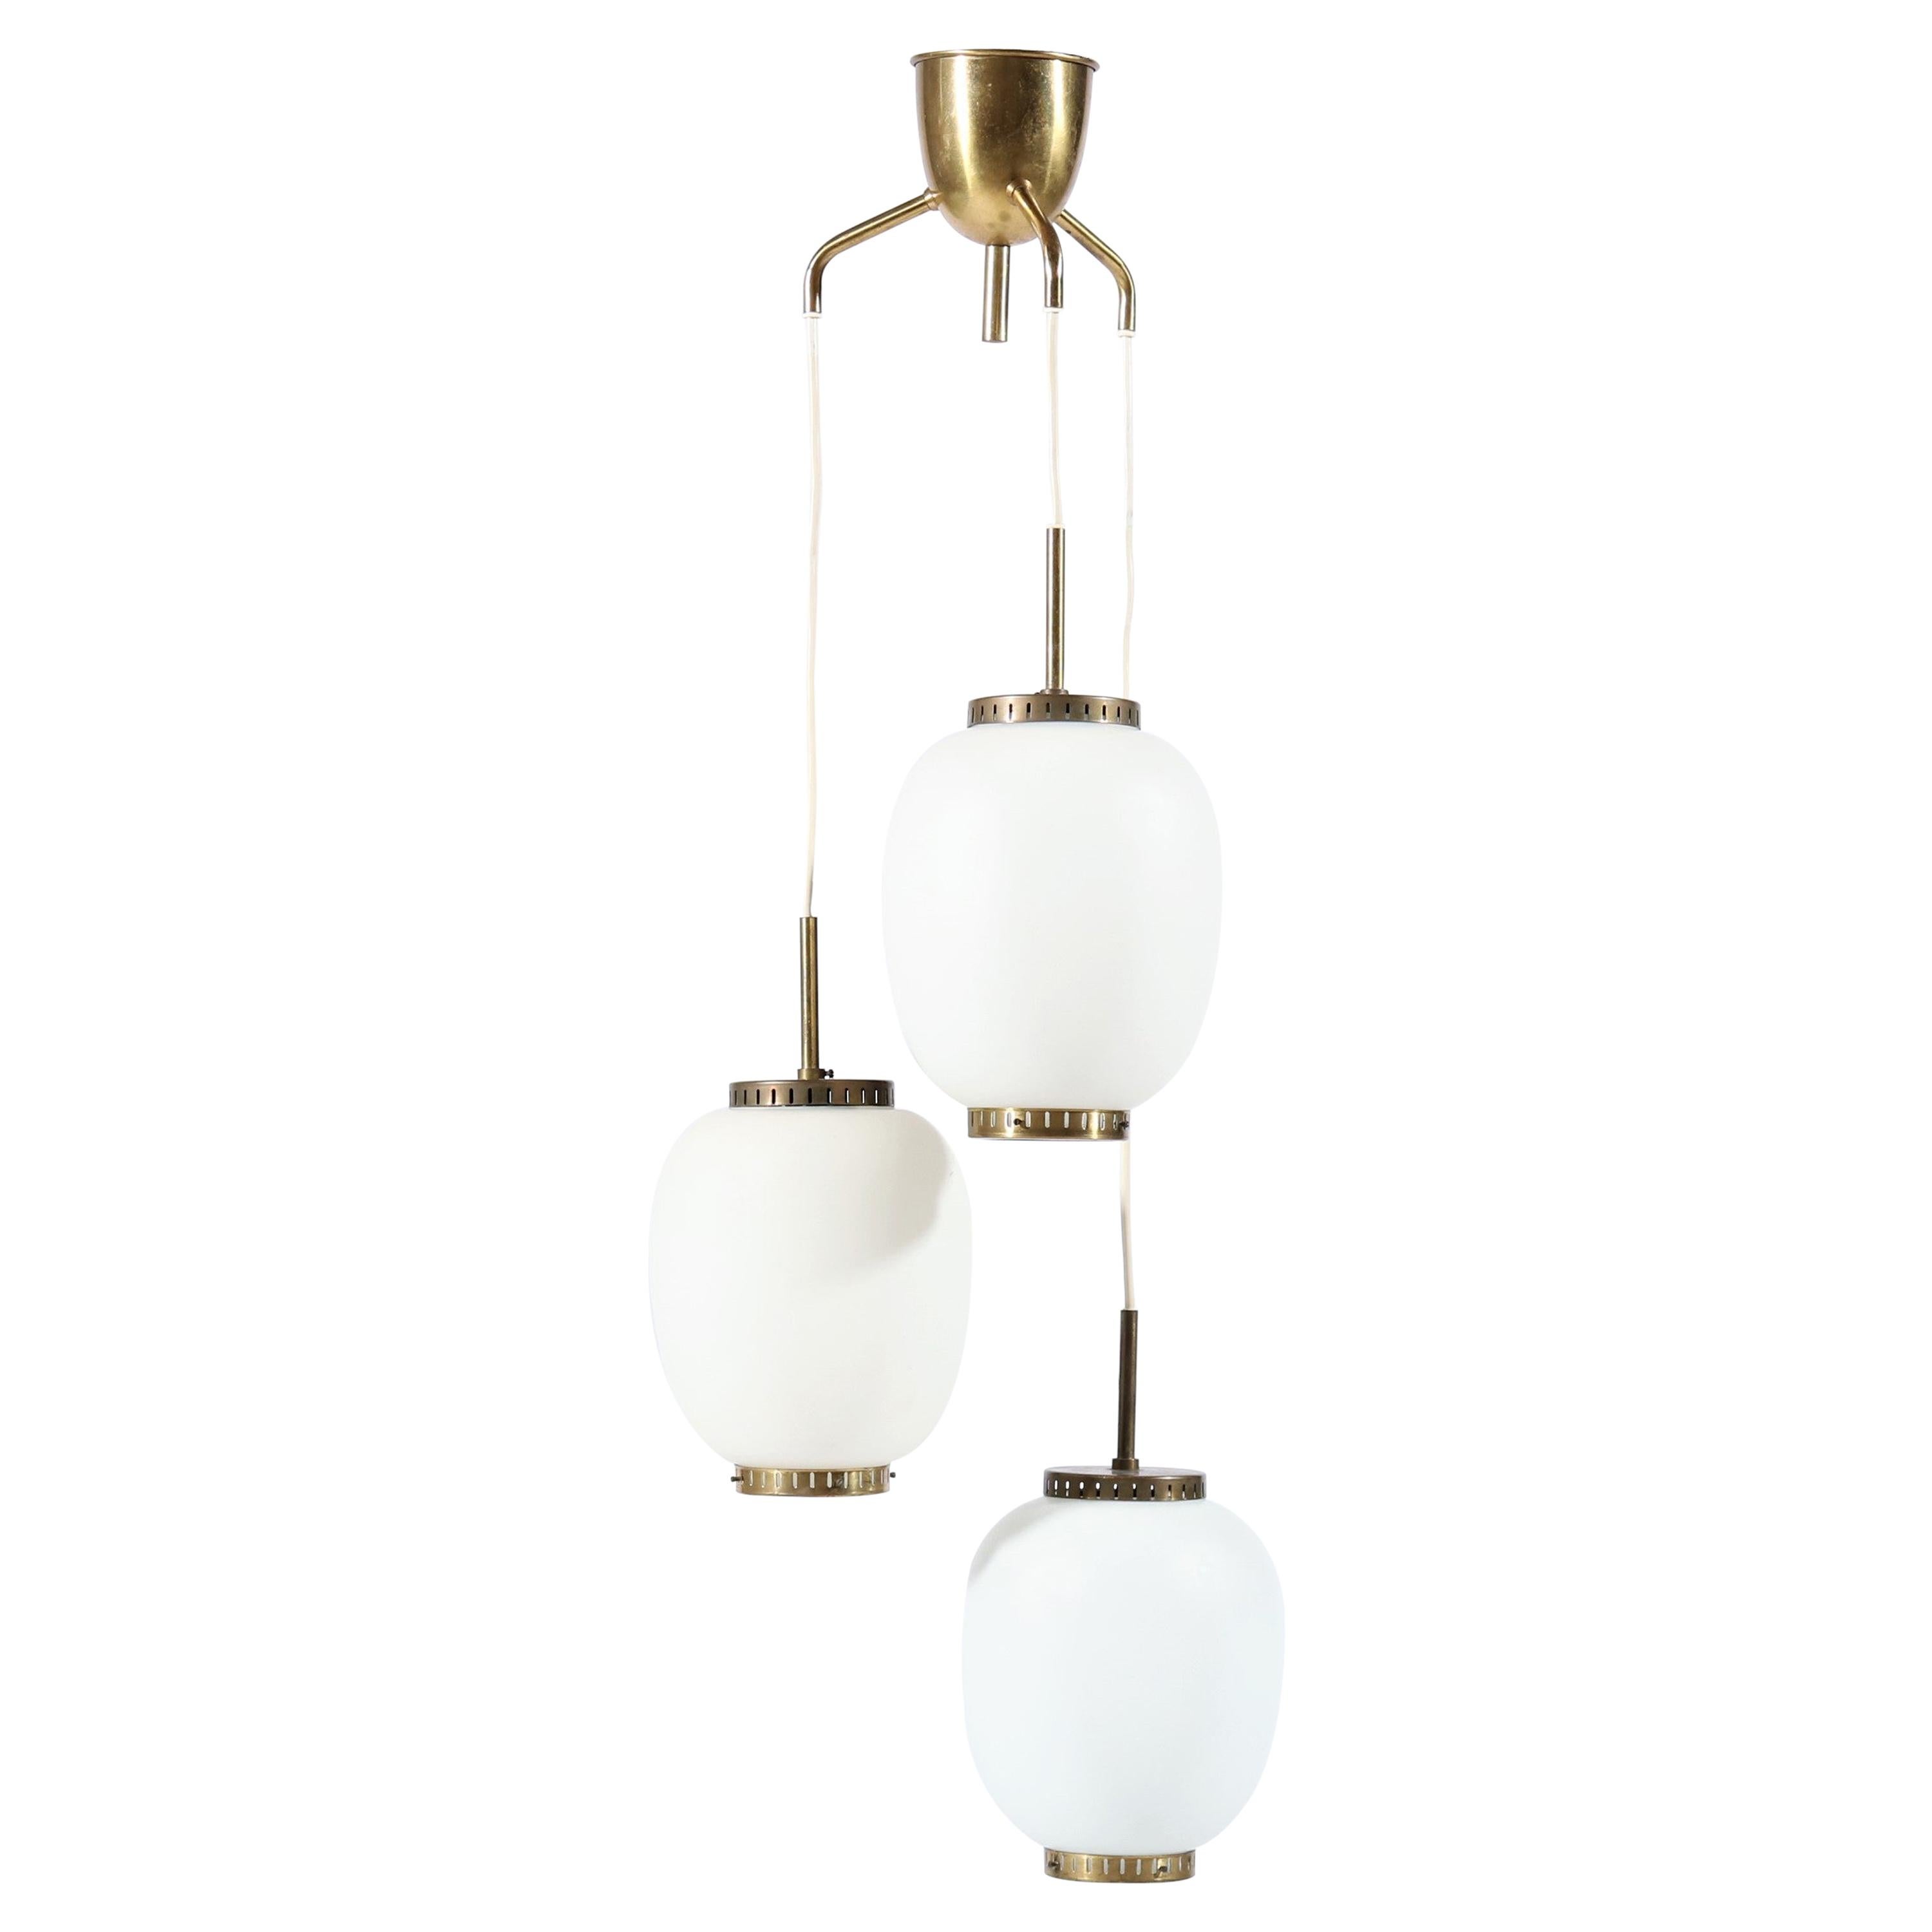 Brass and Opal Glass "China" Chandelier by Bent Karlby for Lyfa, Denmark, 1950s For Sale